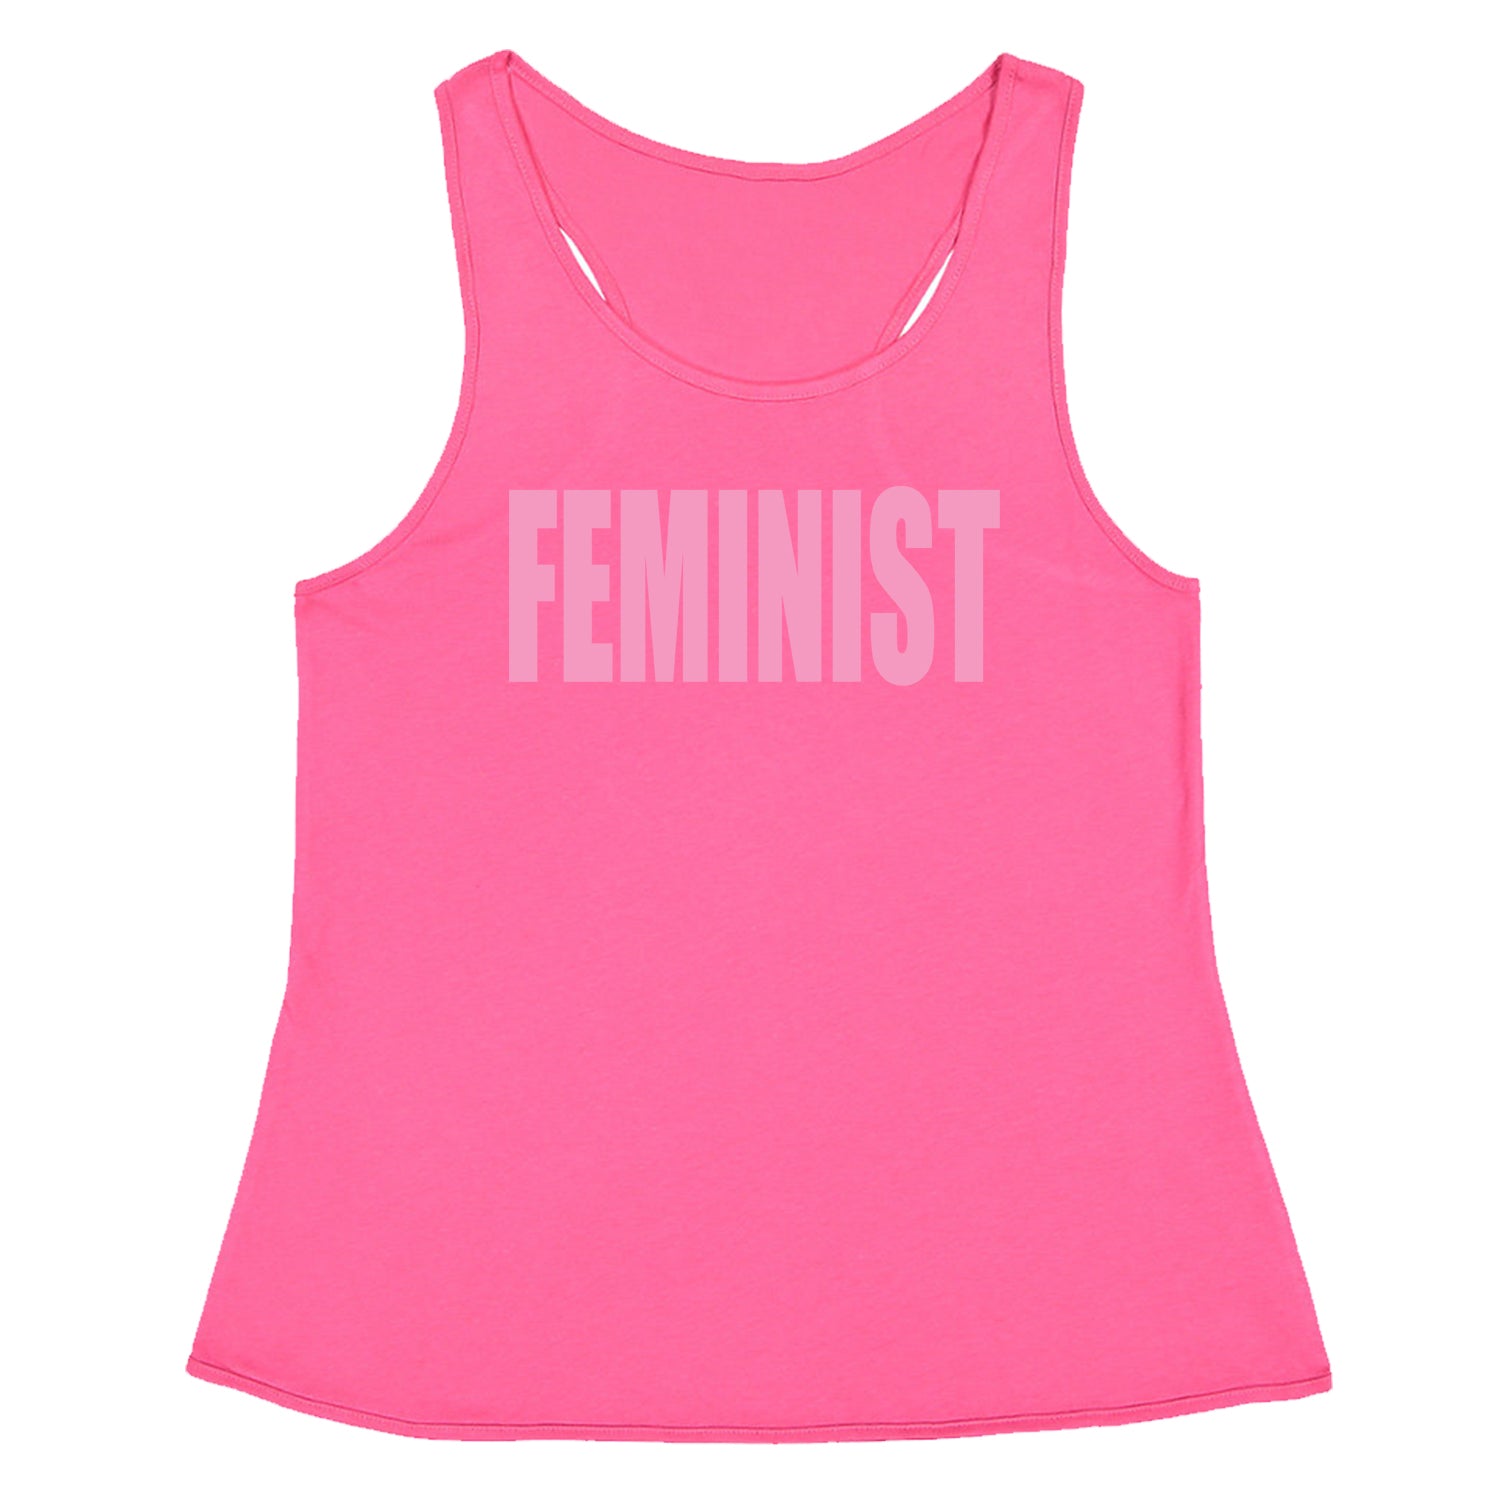 Feminist (Pink Print) Racerback Tank Top for Women a, equal, equality, feminism, feminist, gender, is, lgbtq, like, looks, nevertheless, pay, persisted, rights, she, this, what by Expression Tees